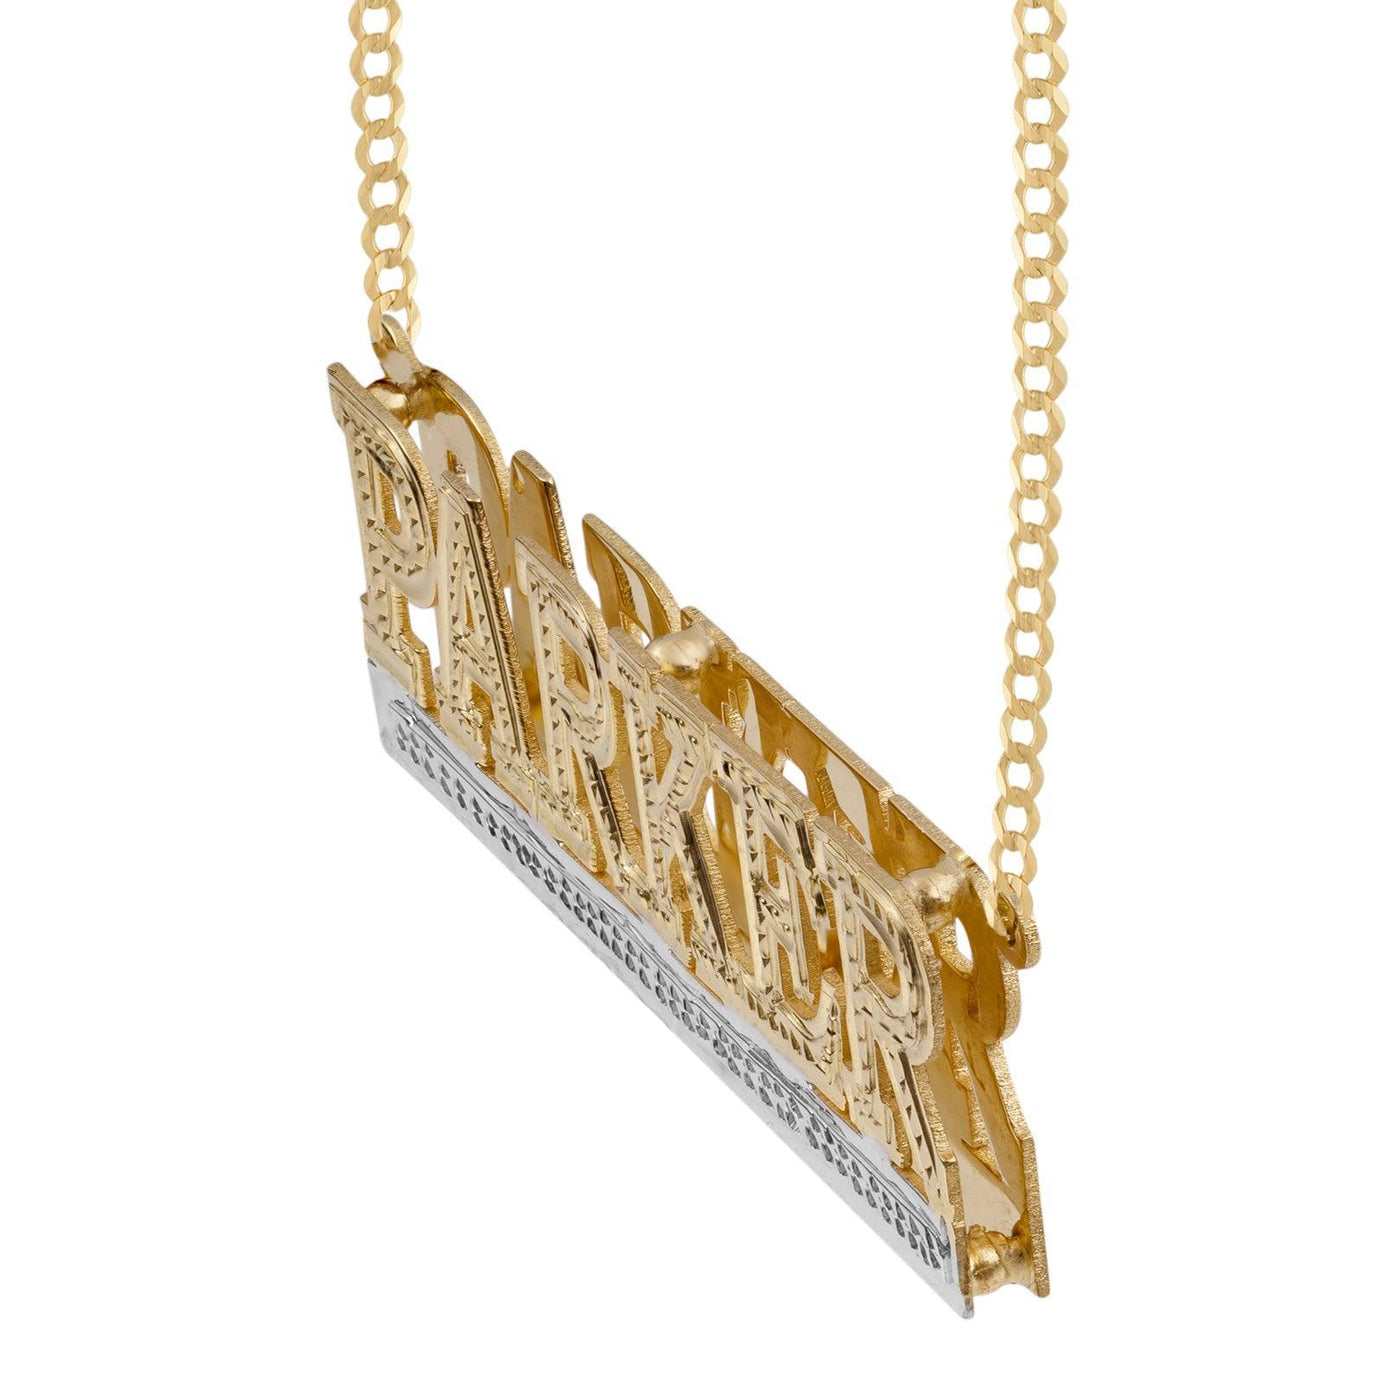 Ladies Script Name Plate Necklace 14K Gold - Style 26 - bayamjewelry